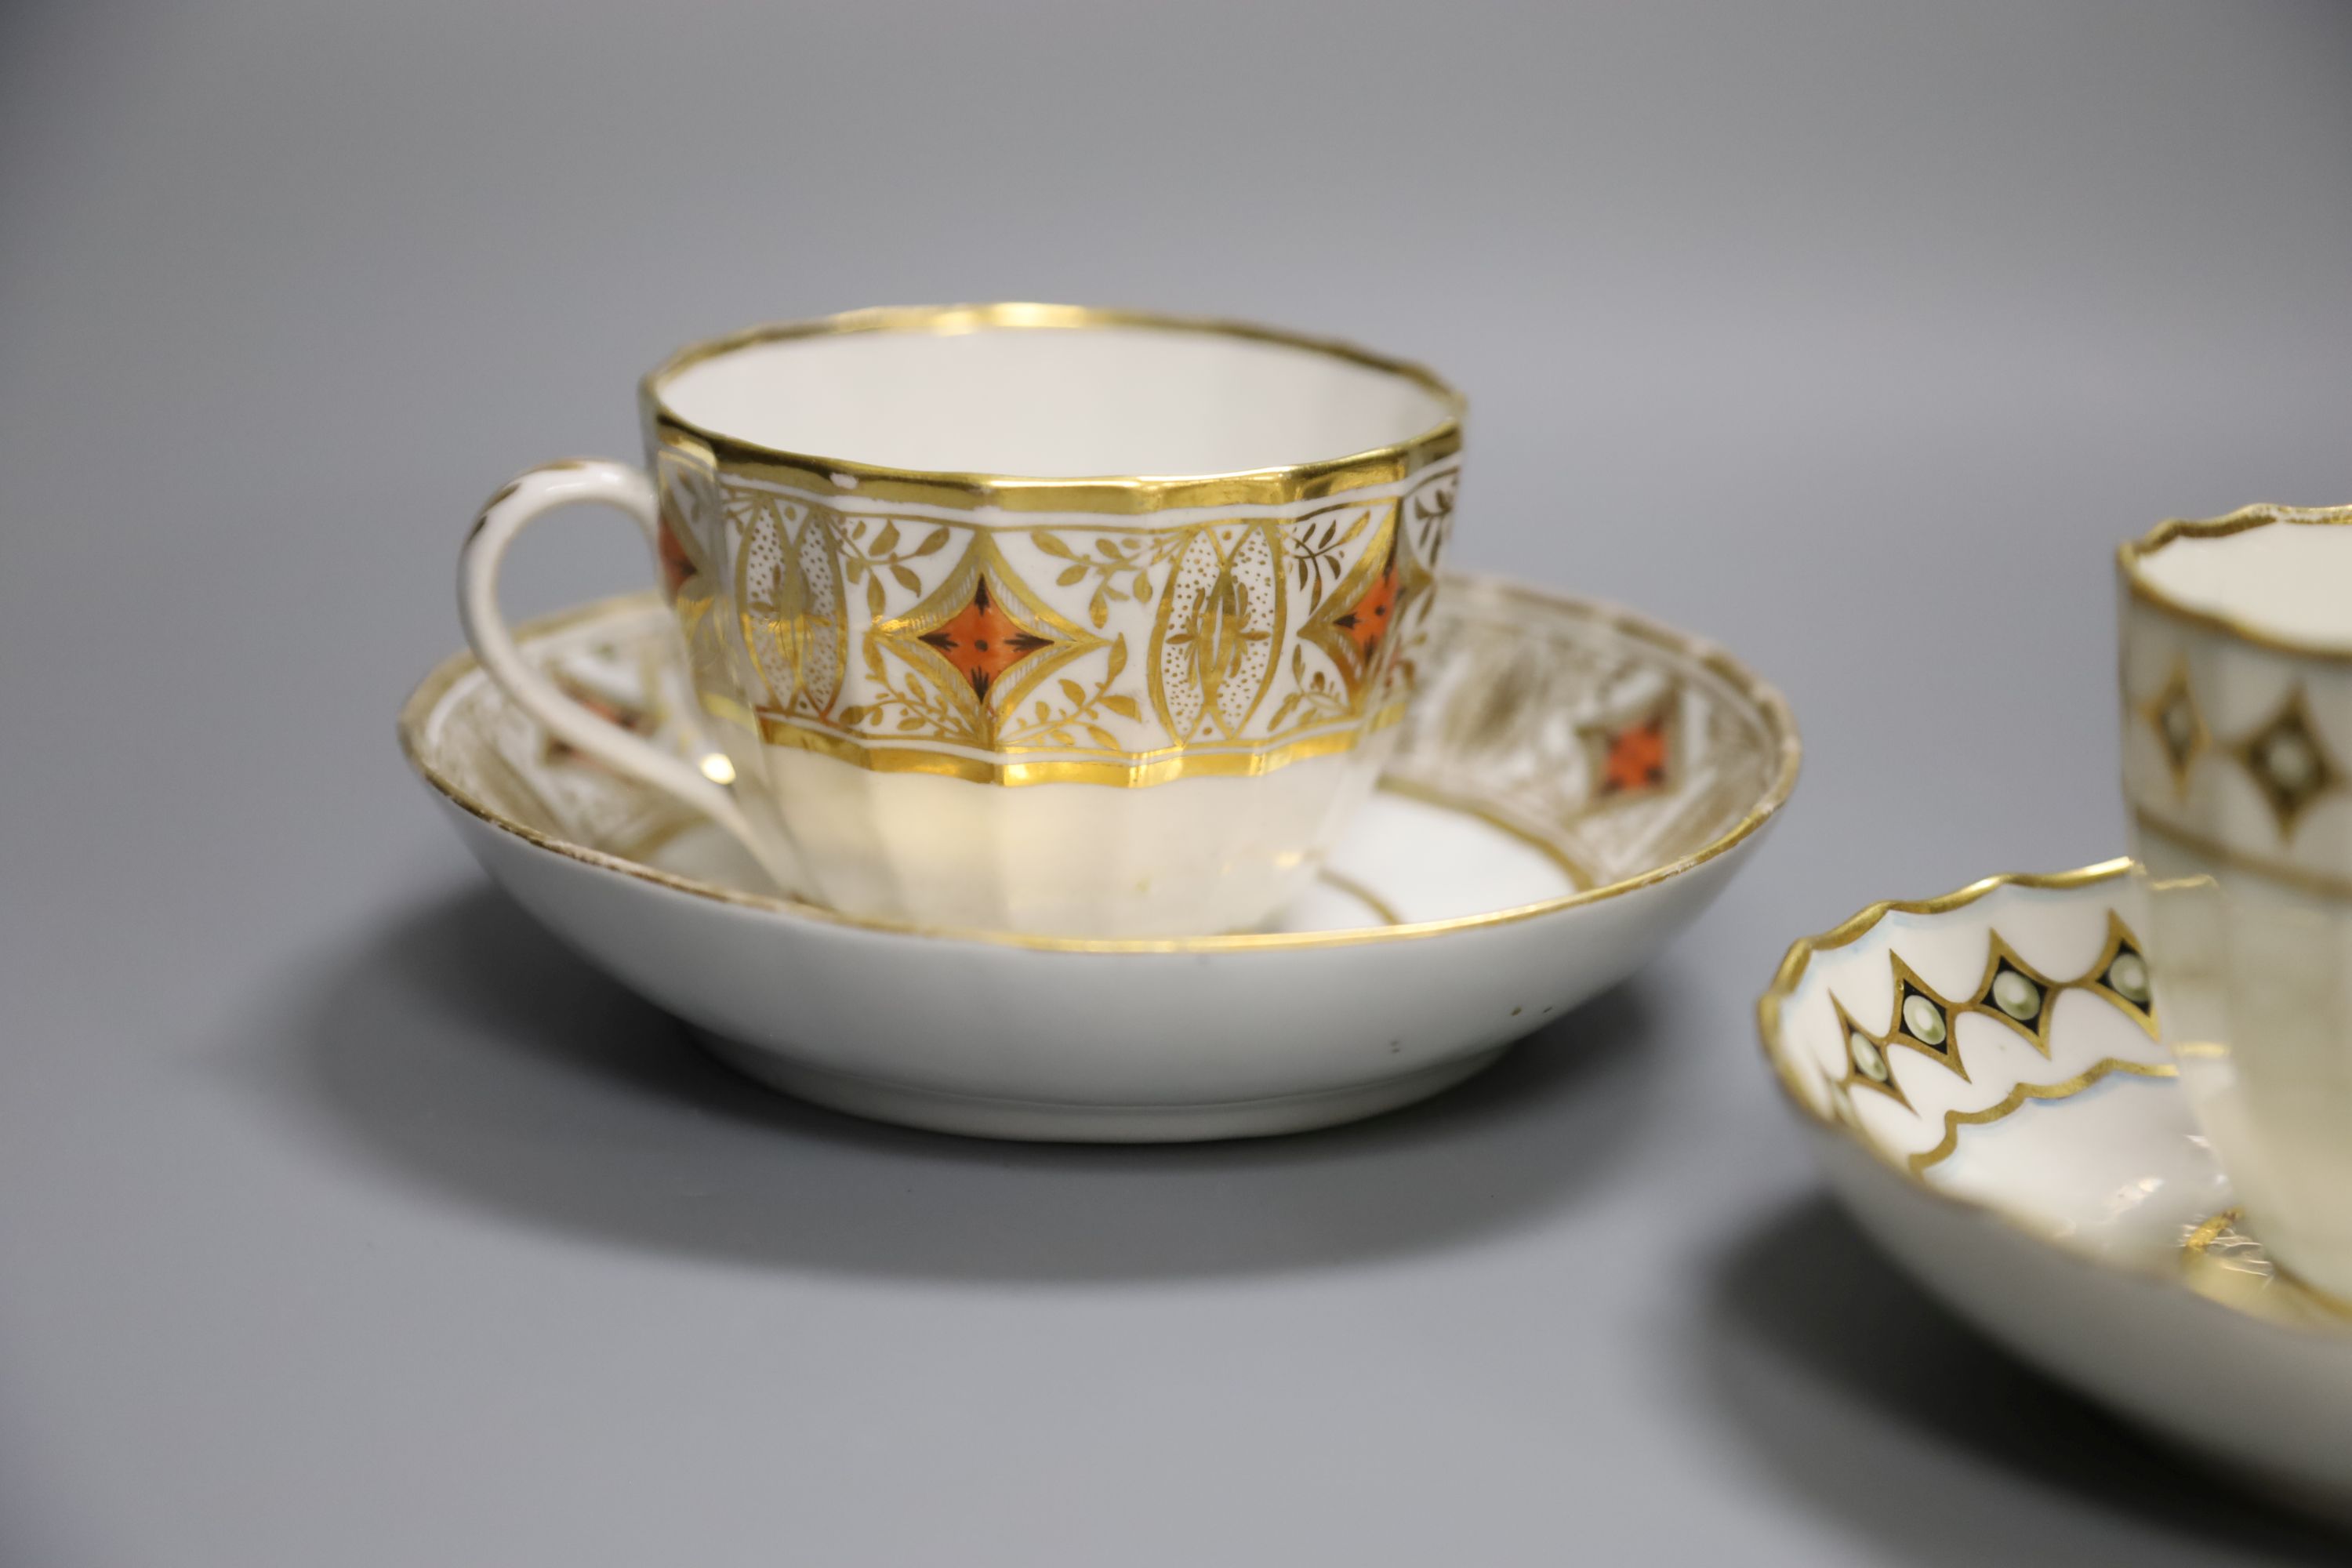 A Derby faceted teacup and saucer painted with pearls on diamond gilding pattern 135 in puce, another similar shaped Derby teacup